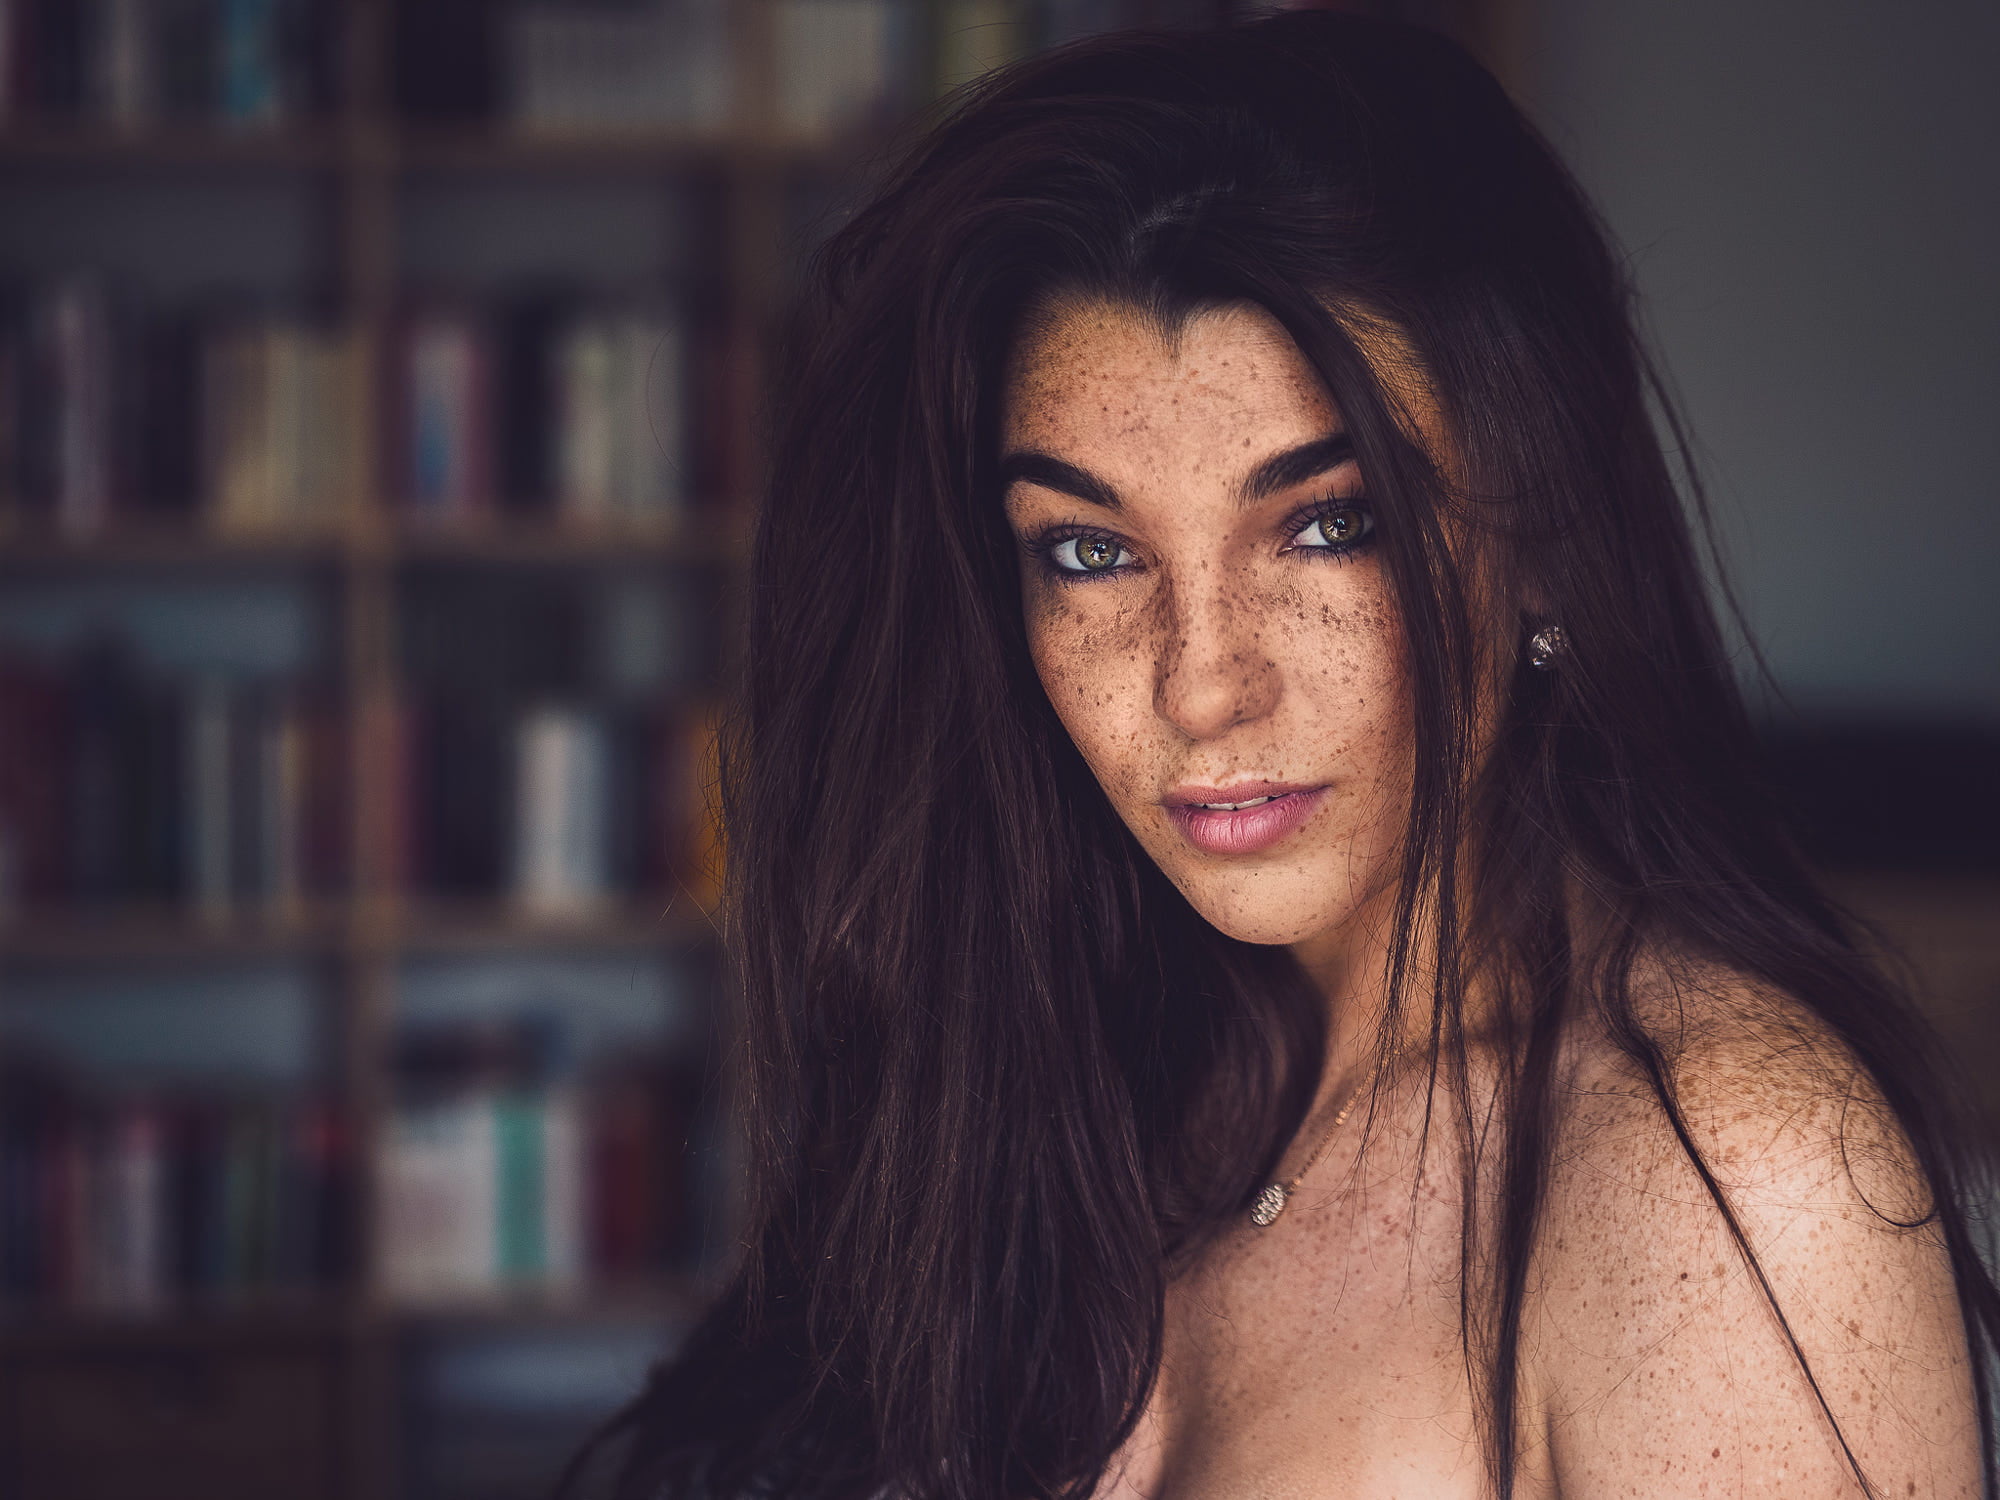 Naked Women With Freckles